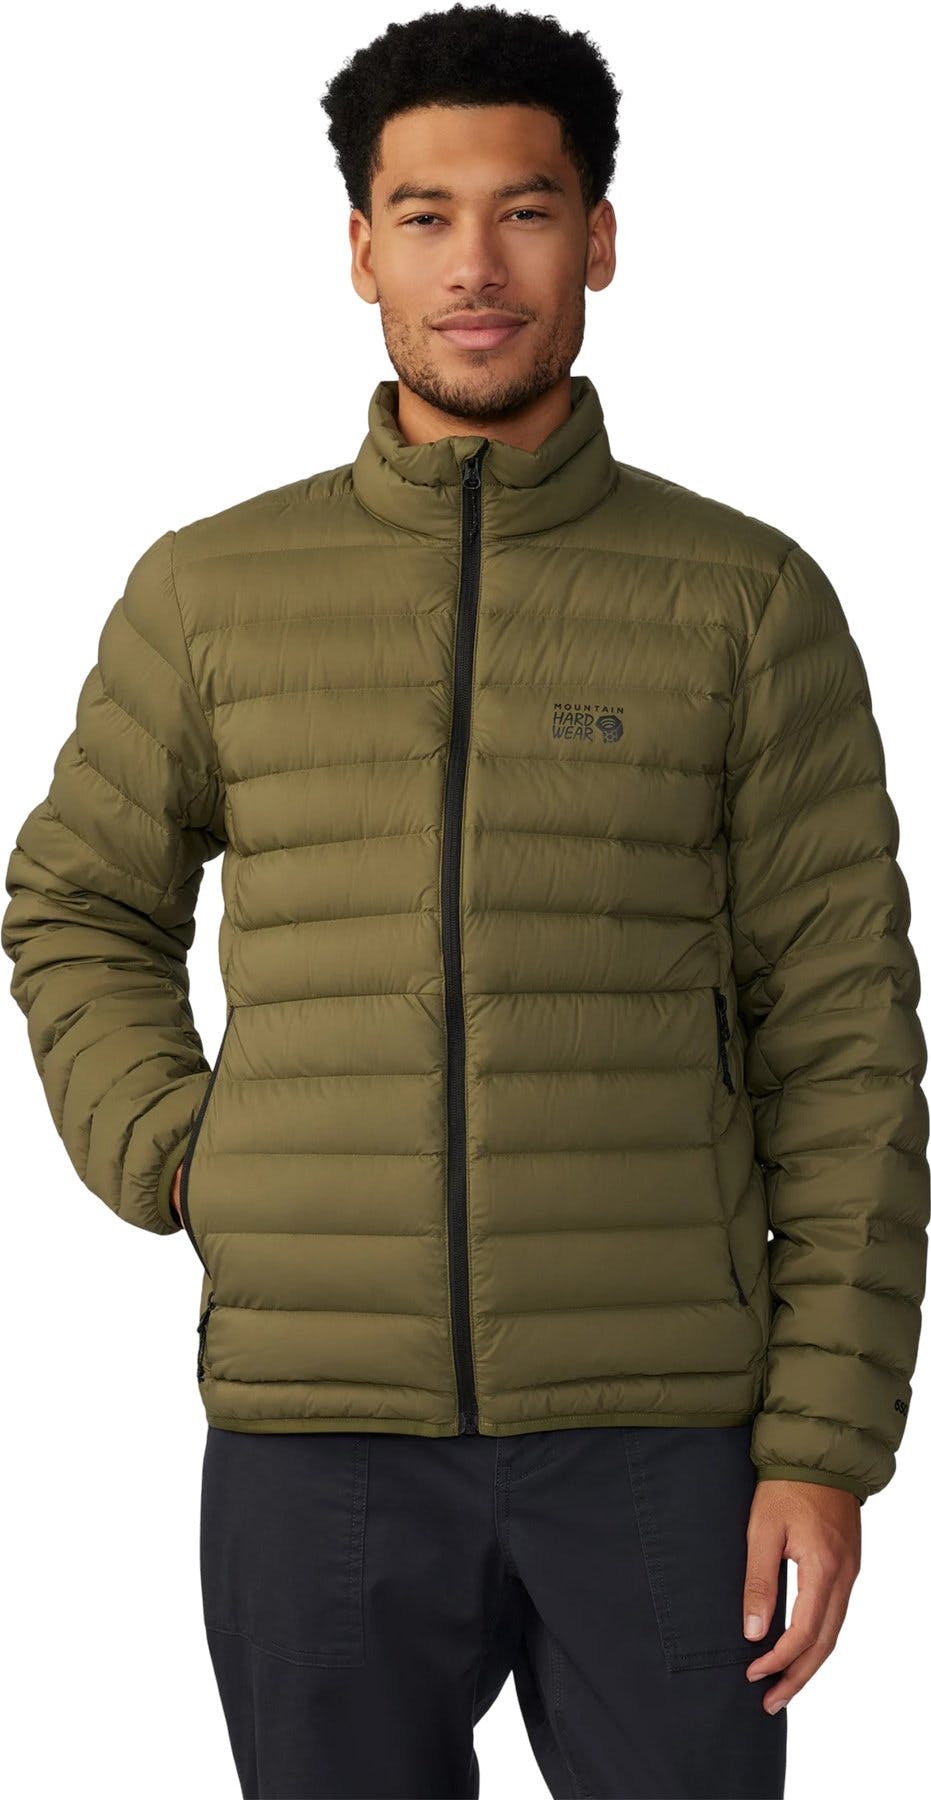 Product image for Deloro Down Jacket - Men's